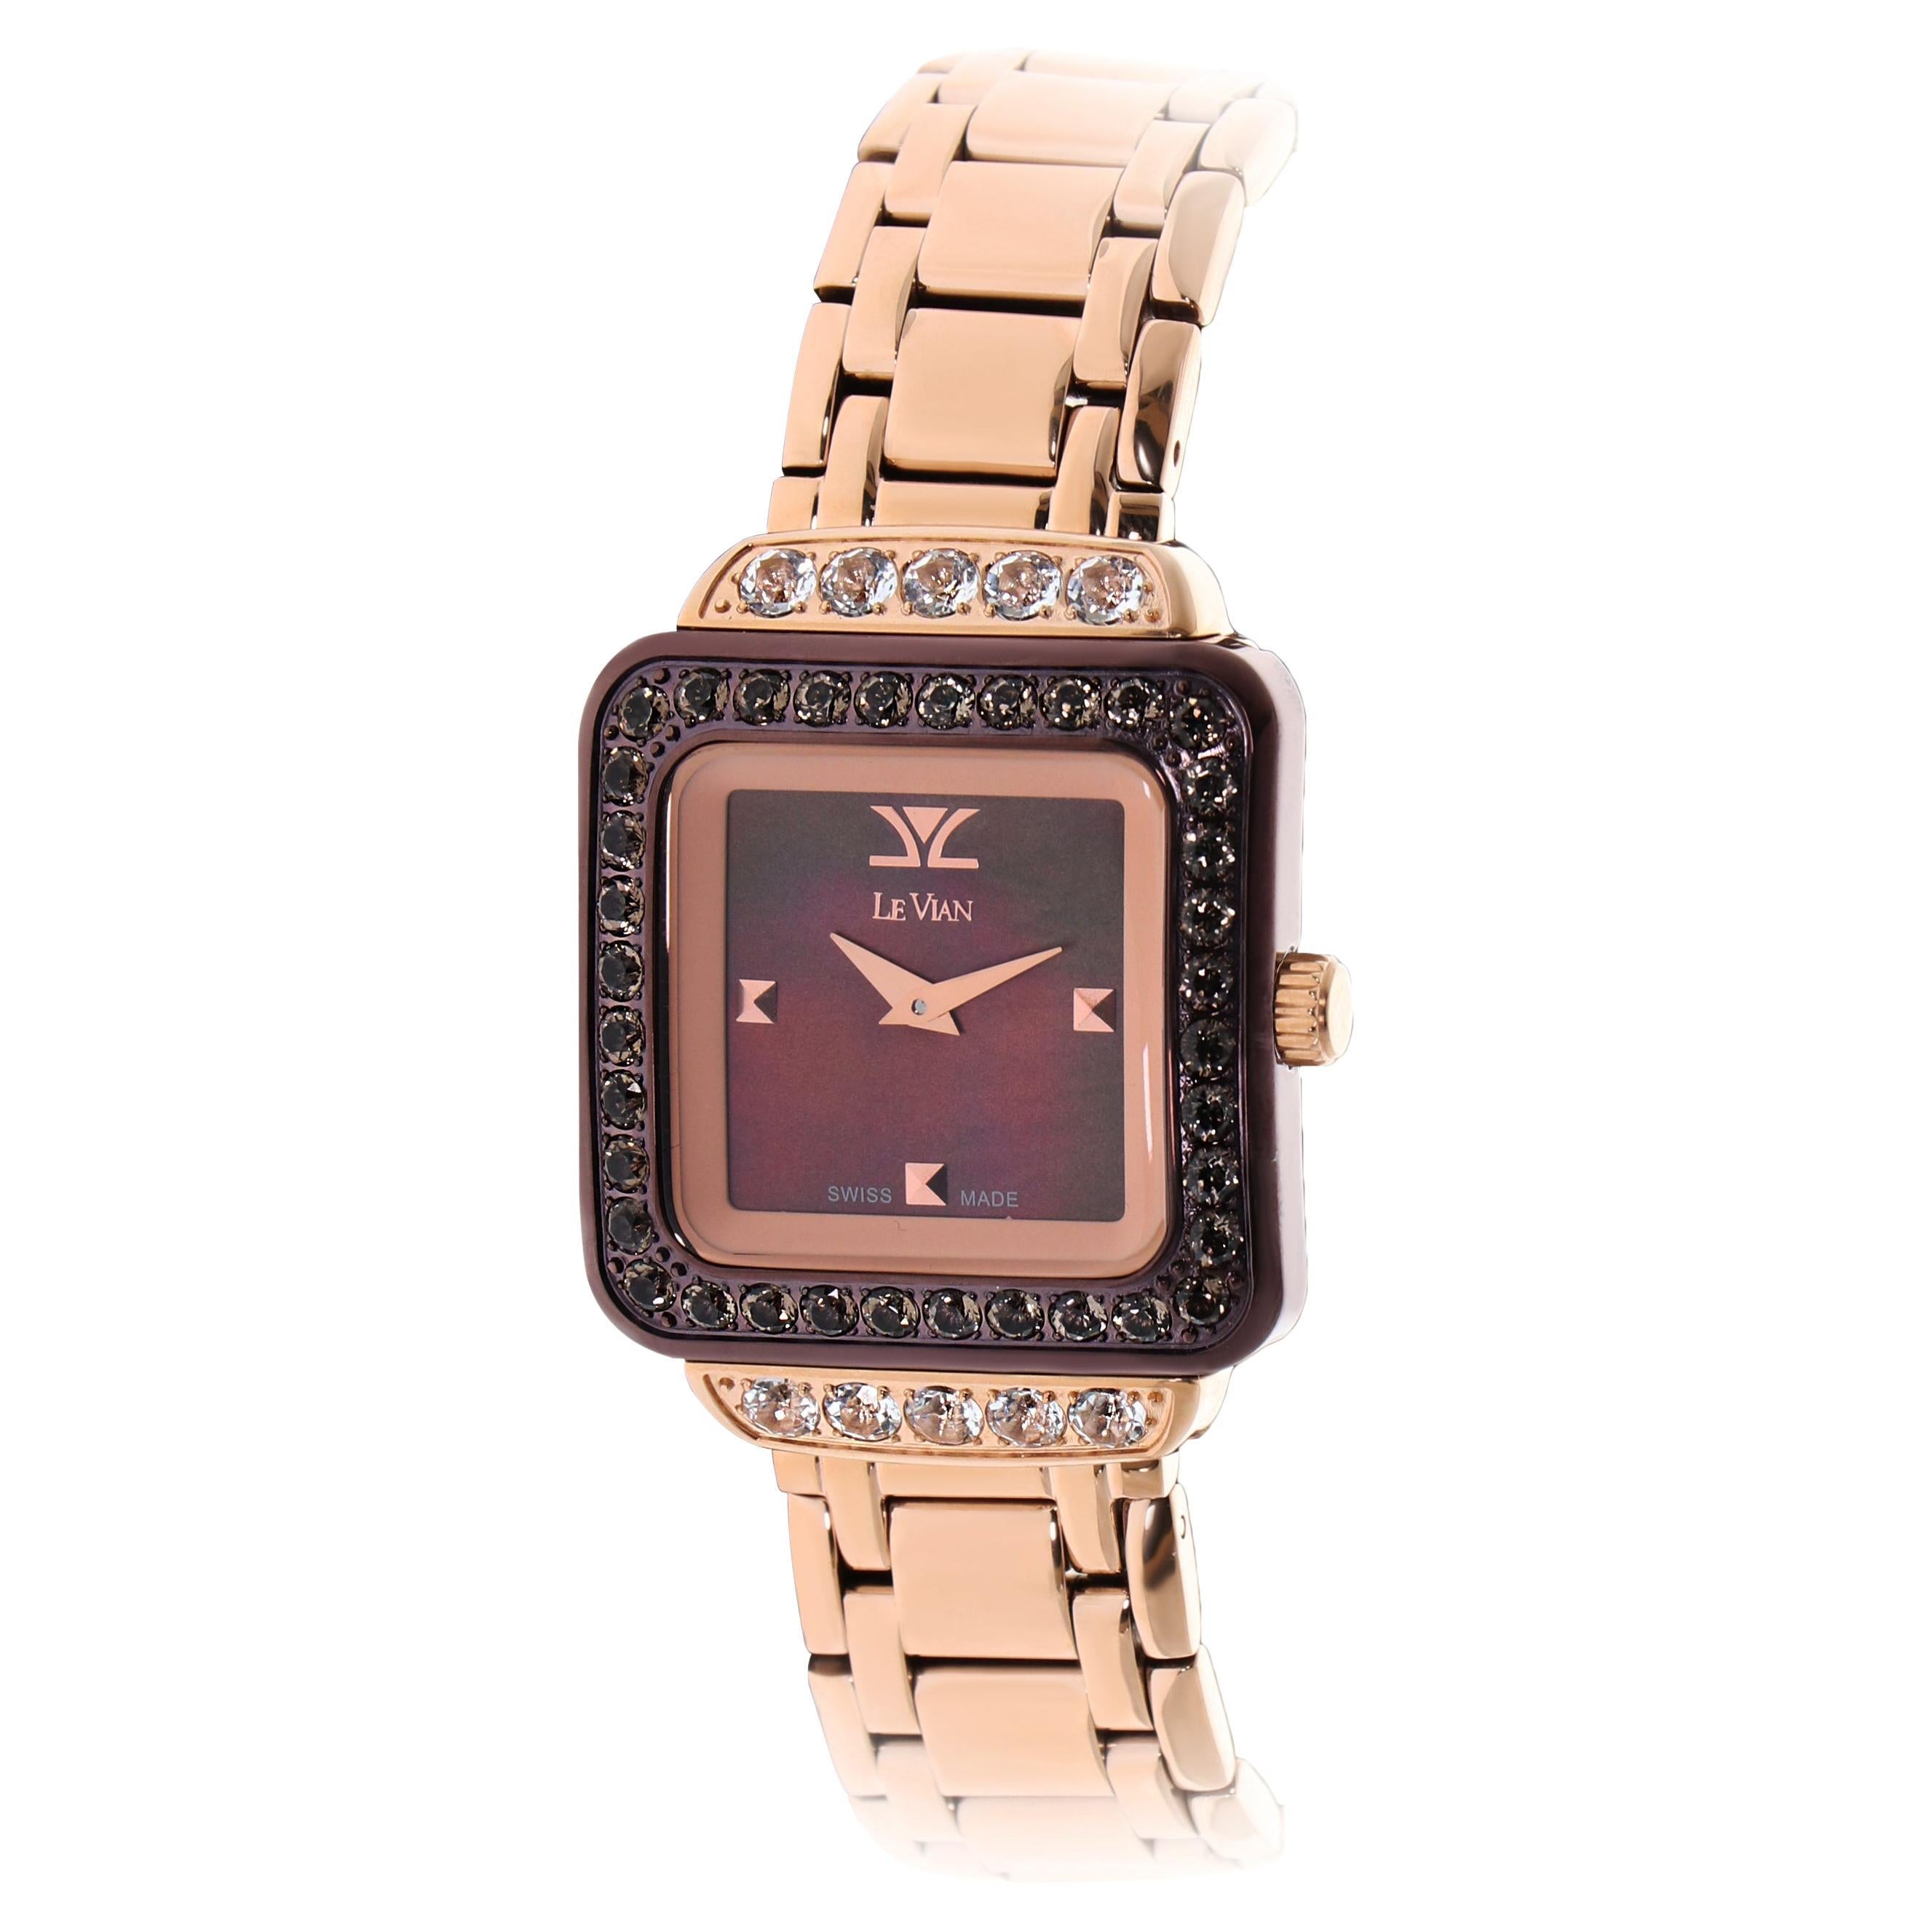 Le Vian Watch Chocolate Quartz Vanilla Topaz in Strawberry Gold Stainless Steel For Sale